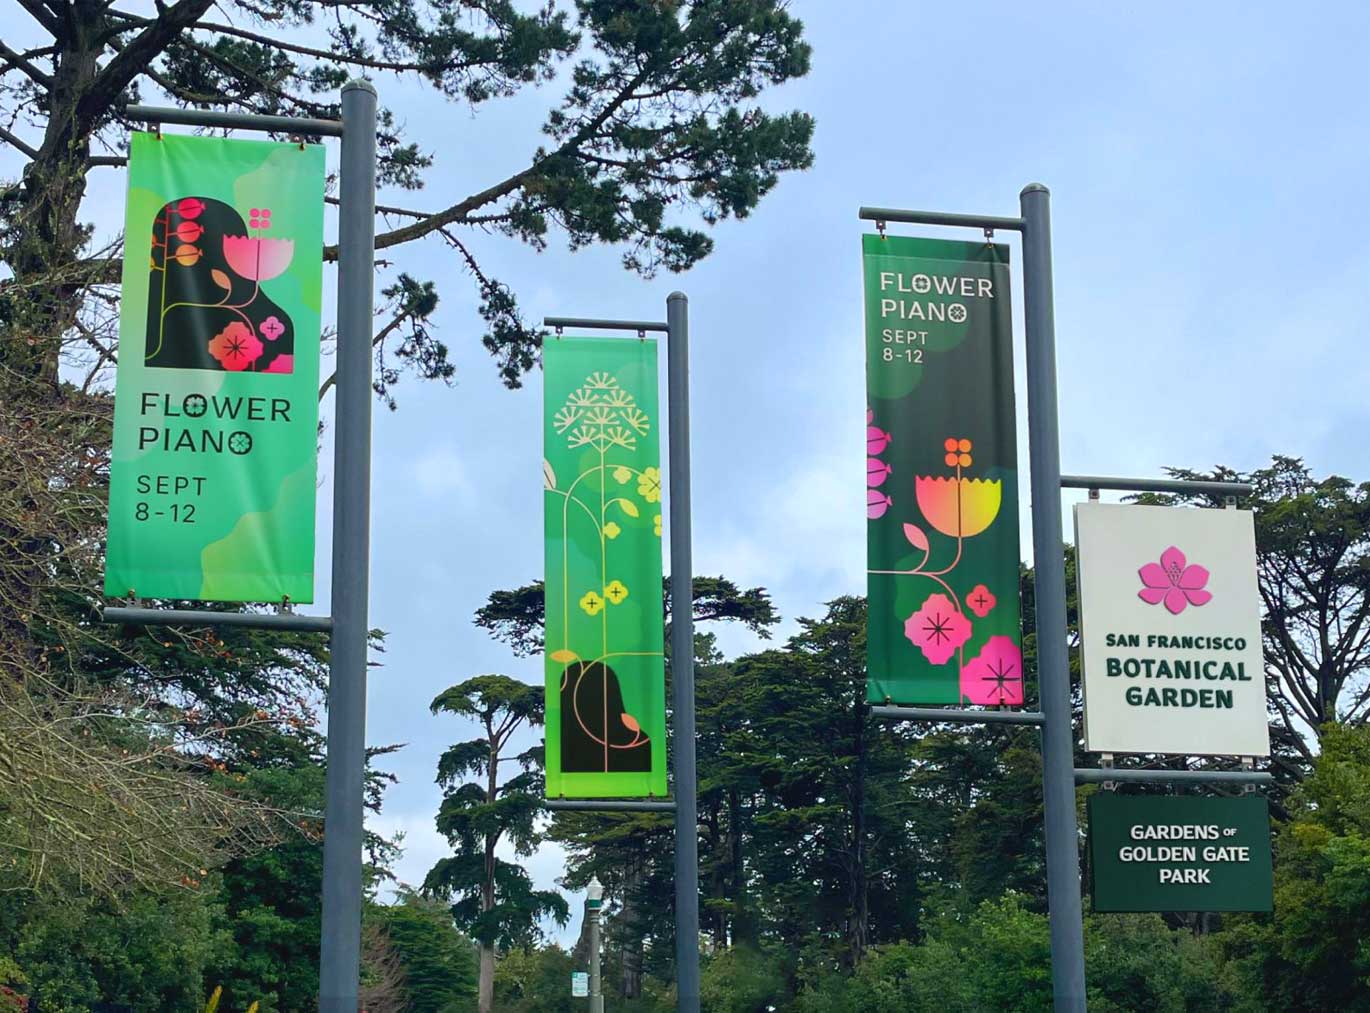 Banner in the San Francisco Botanical Garden “Gardens of Golden Gate Park” with the text “Flower Piano Sept 8 - 12” with trees in the background